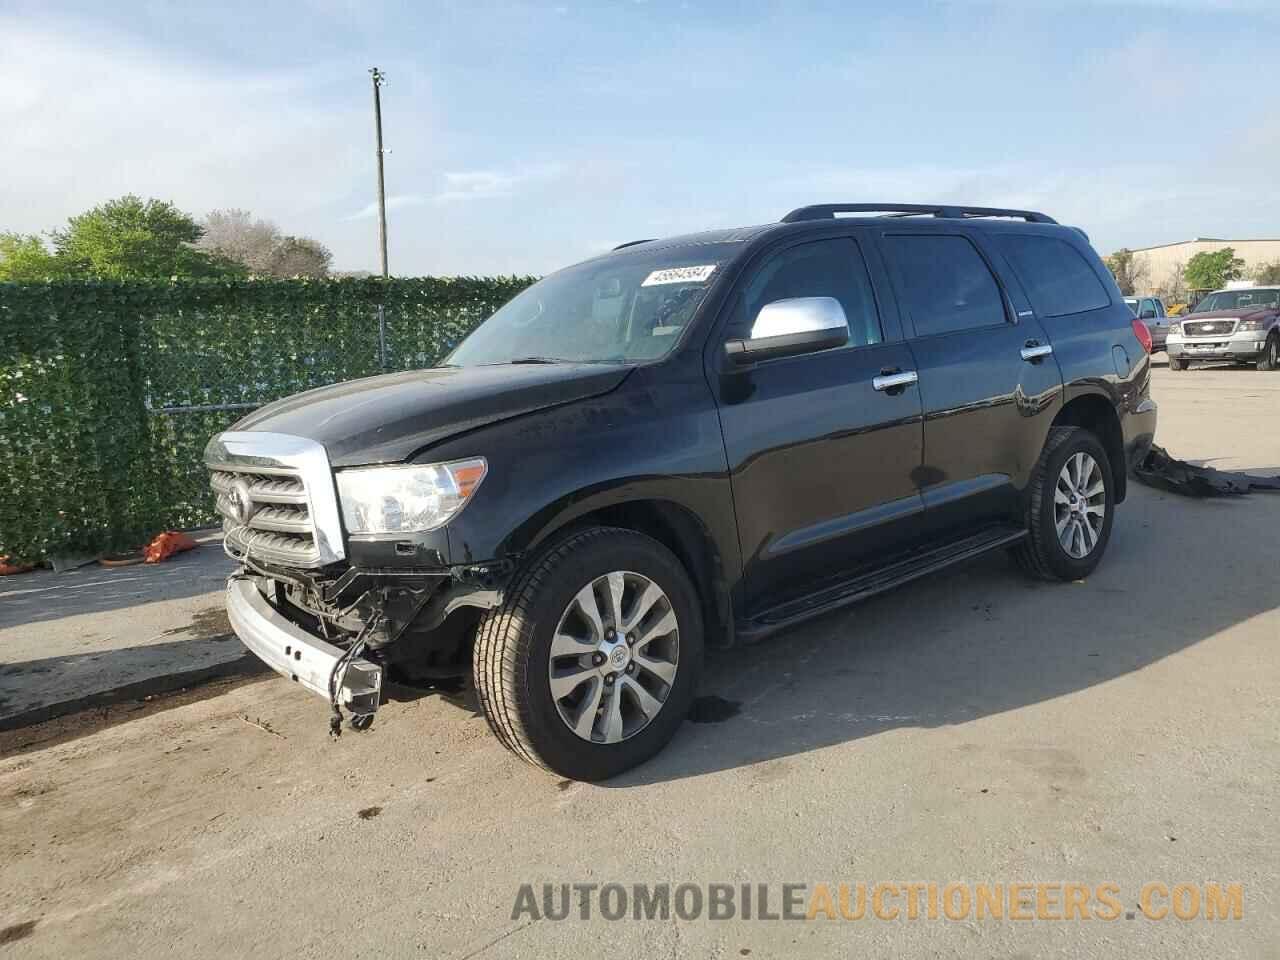 5TDKY5G18HS068360 TOYOTA SEQUOIA 2017